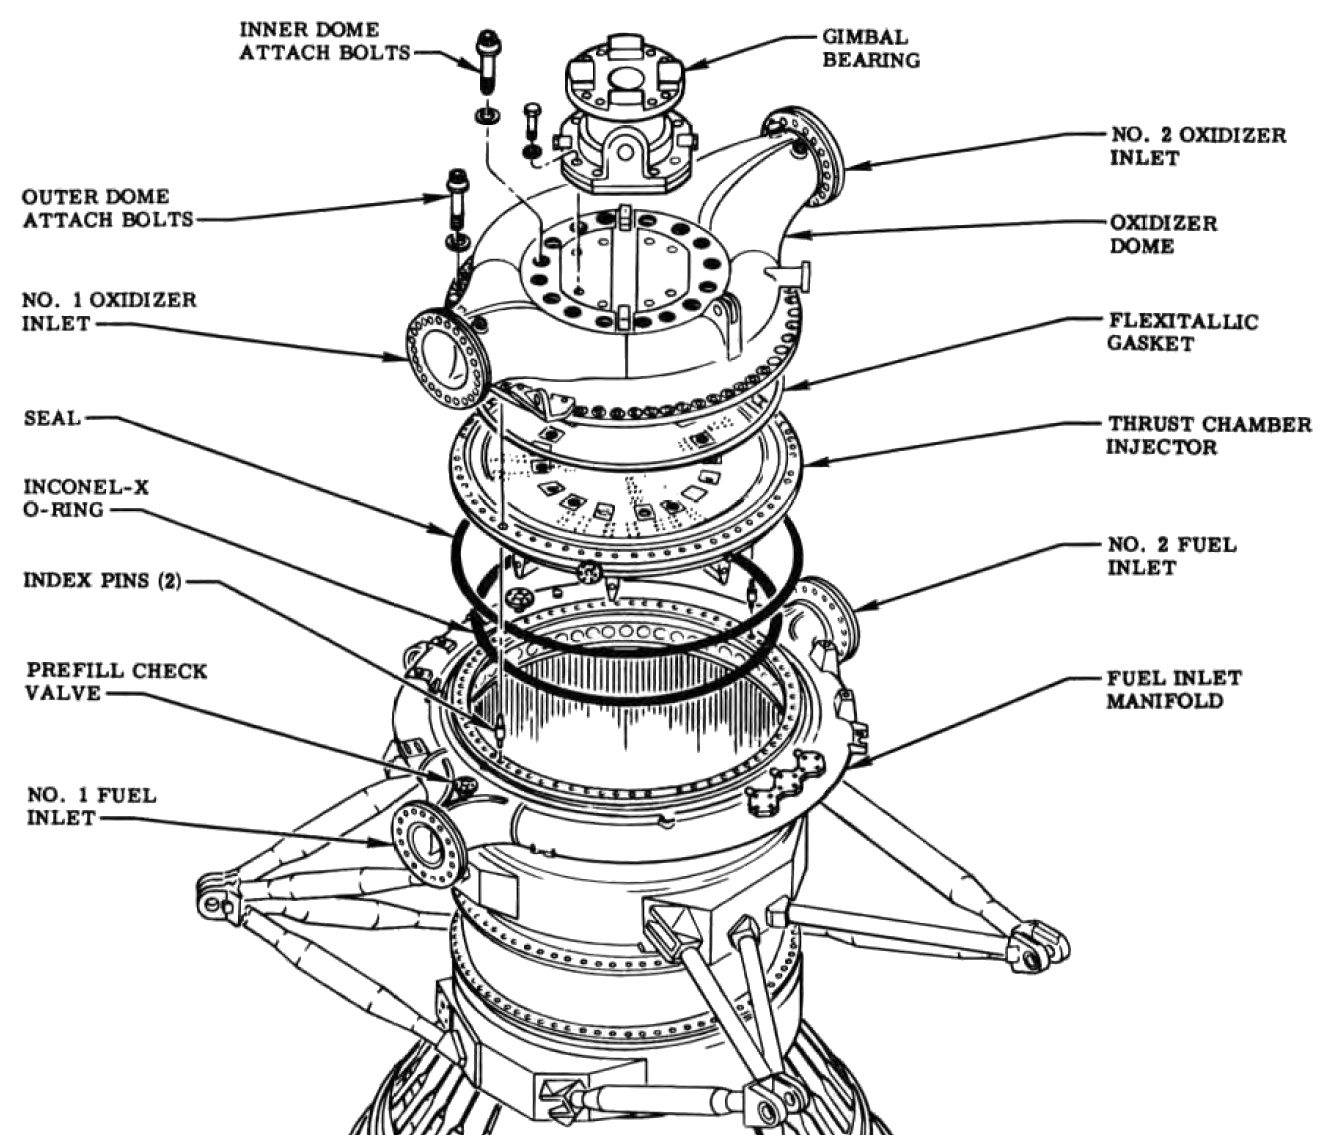 f-1-injector-end-exploded-view.jpg